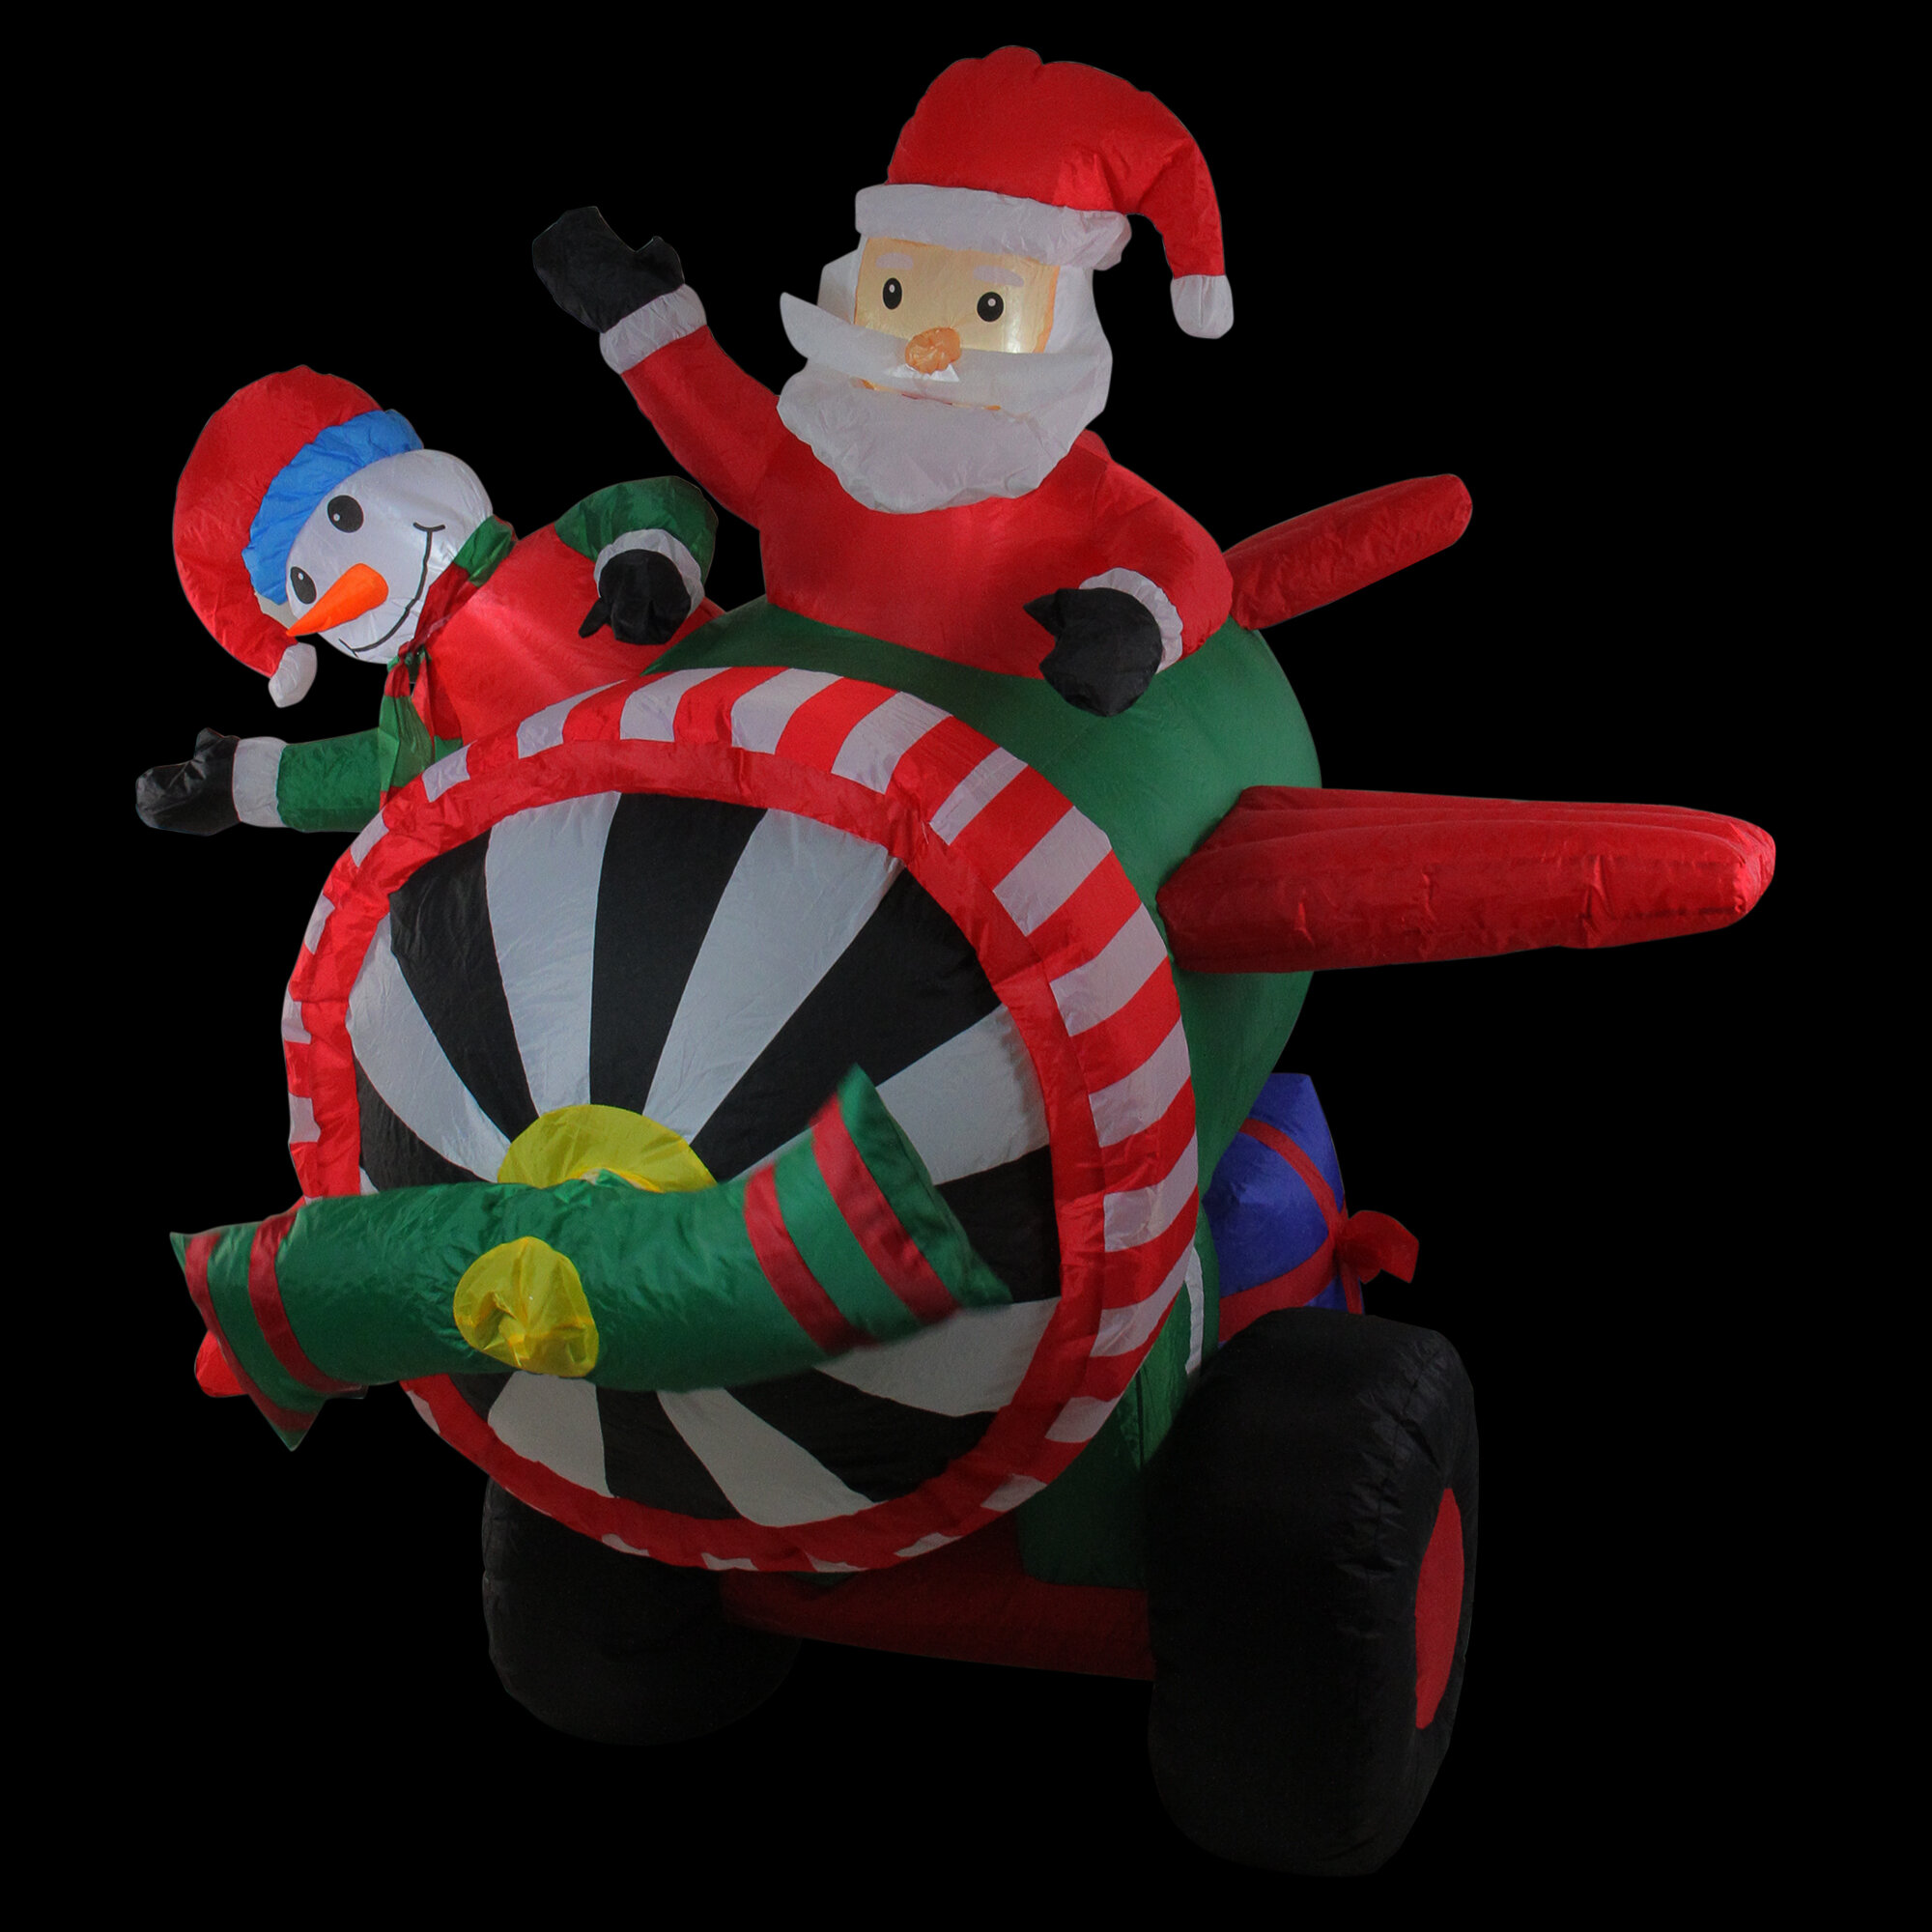 Gemmy Holiday Christmas Airblown Inflatable Animated Helicopter w/ Santa Snowman